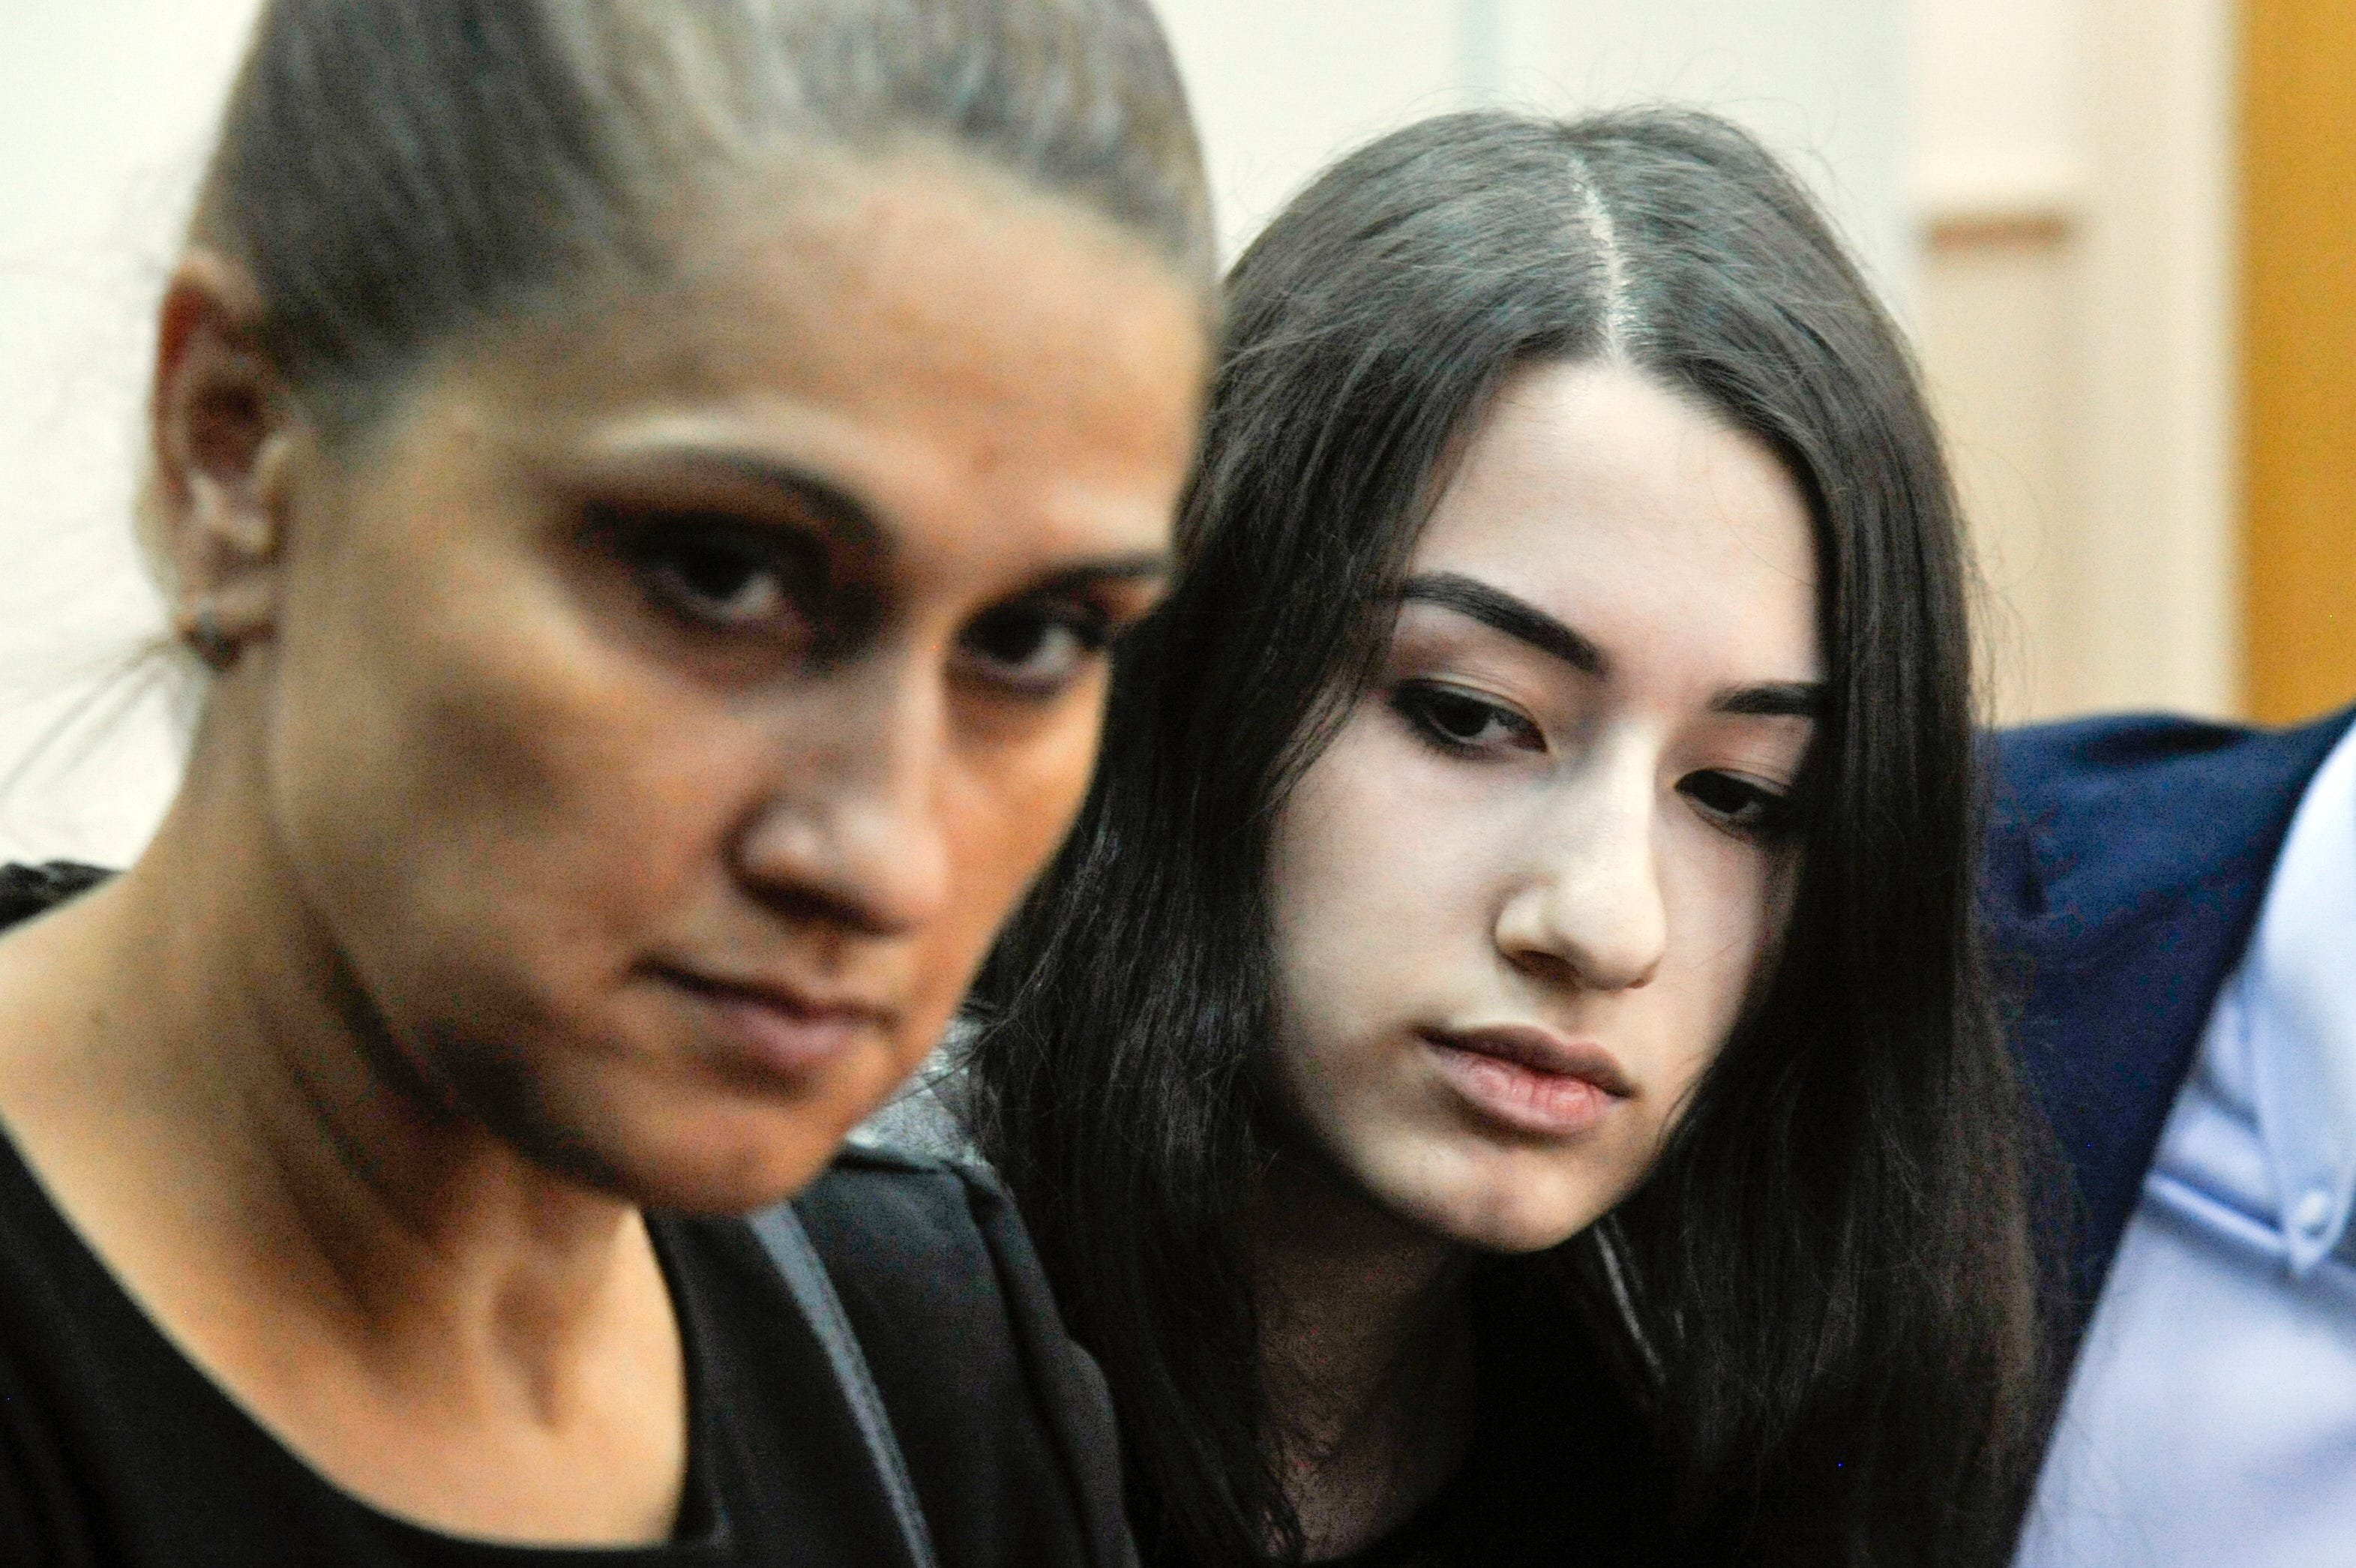 Khachaturyan sisters in Russia killed father, charged with murder